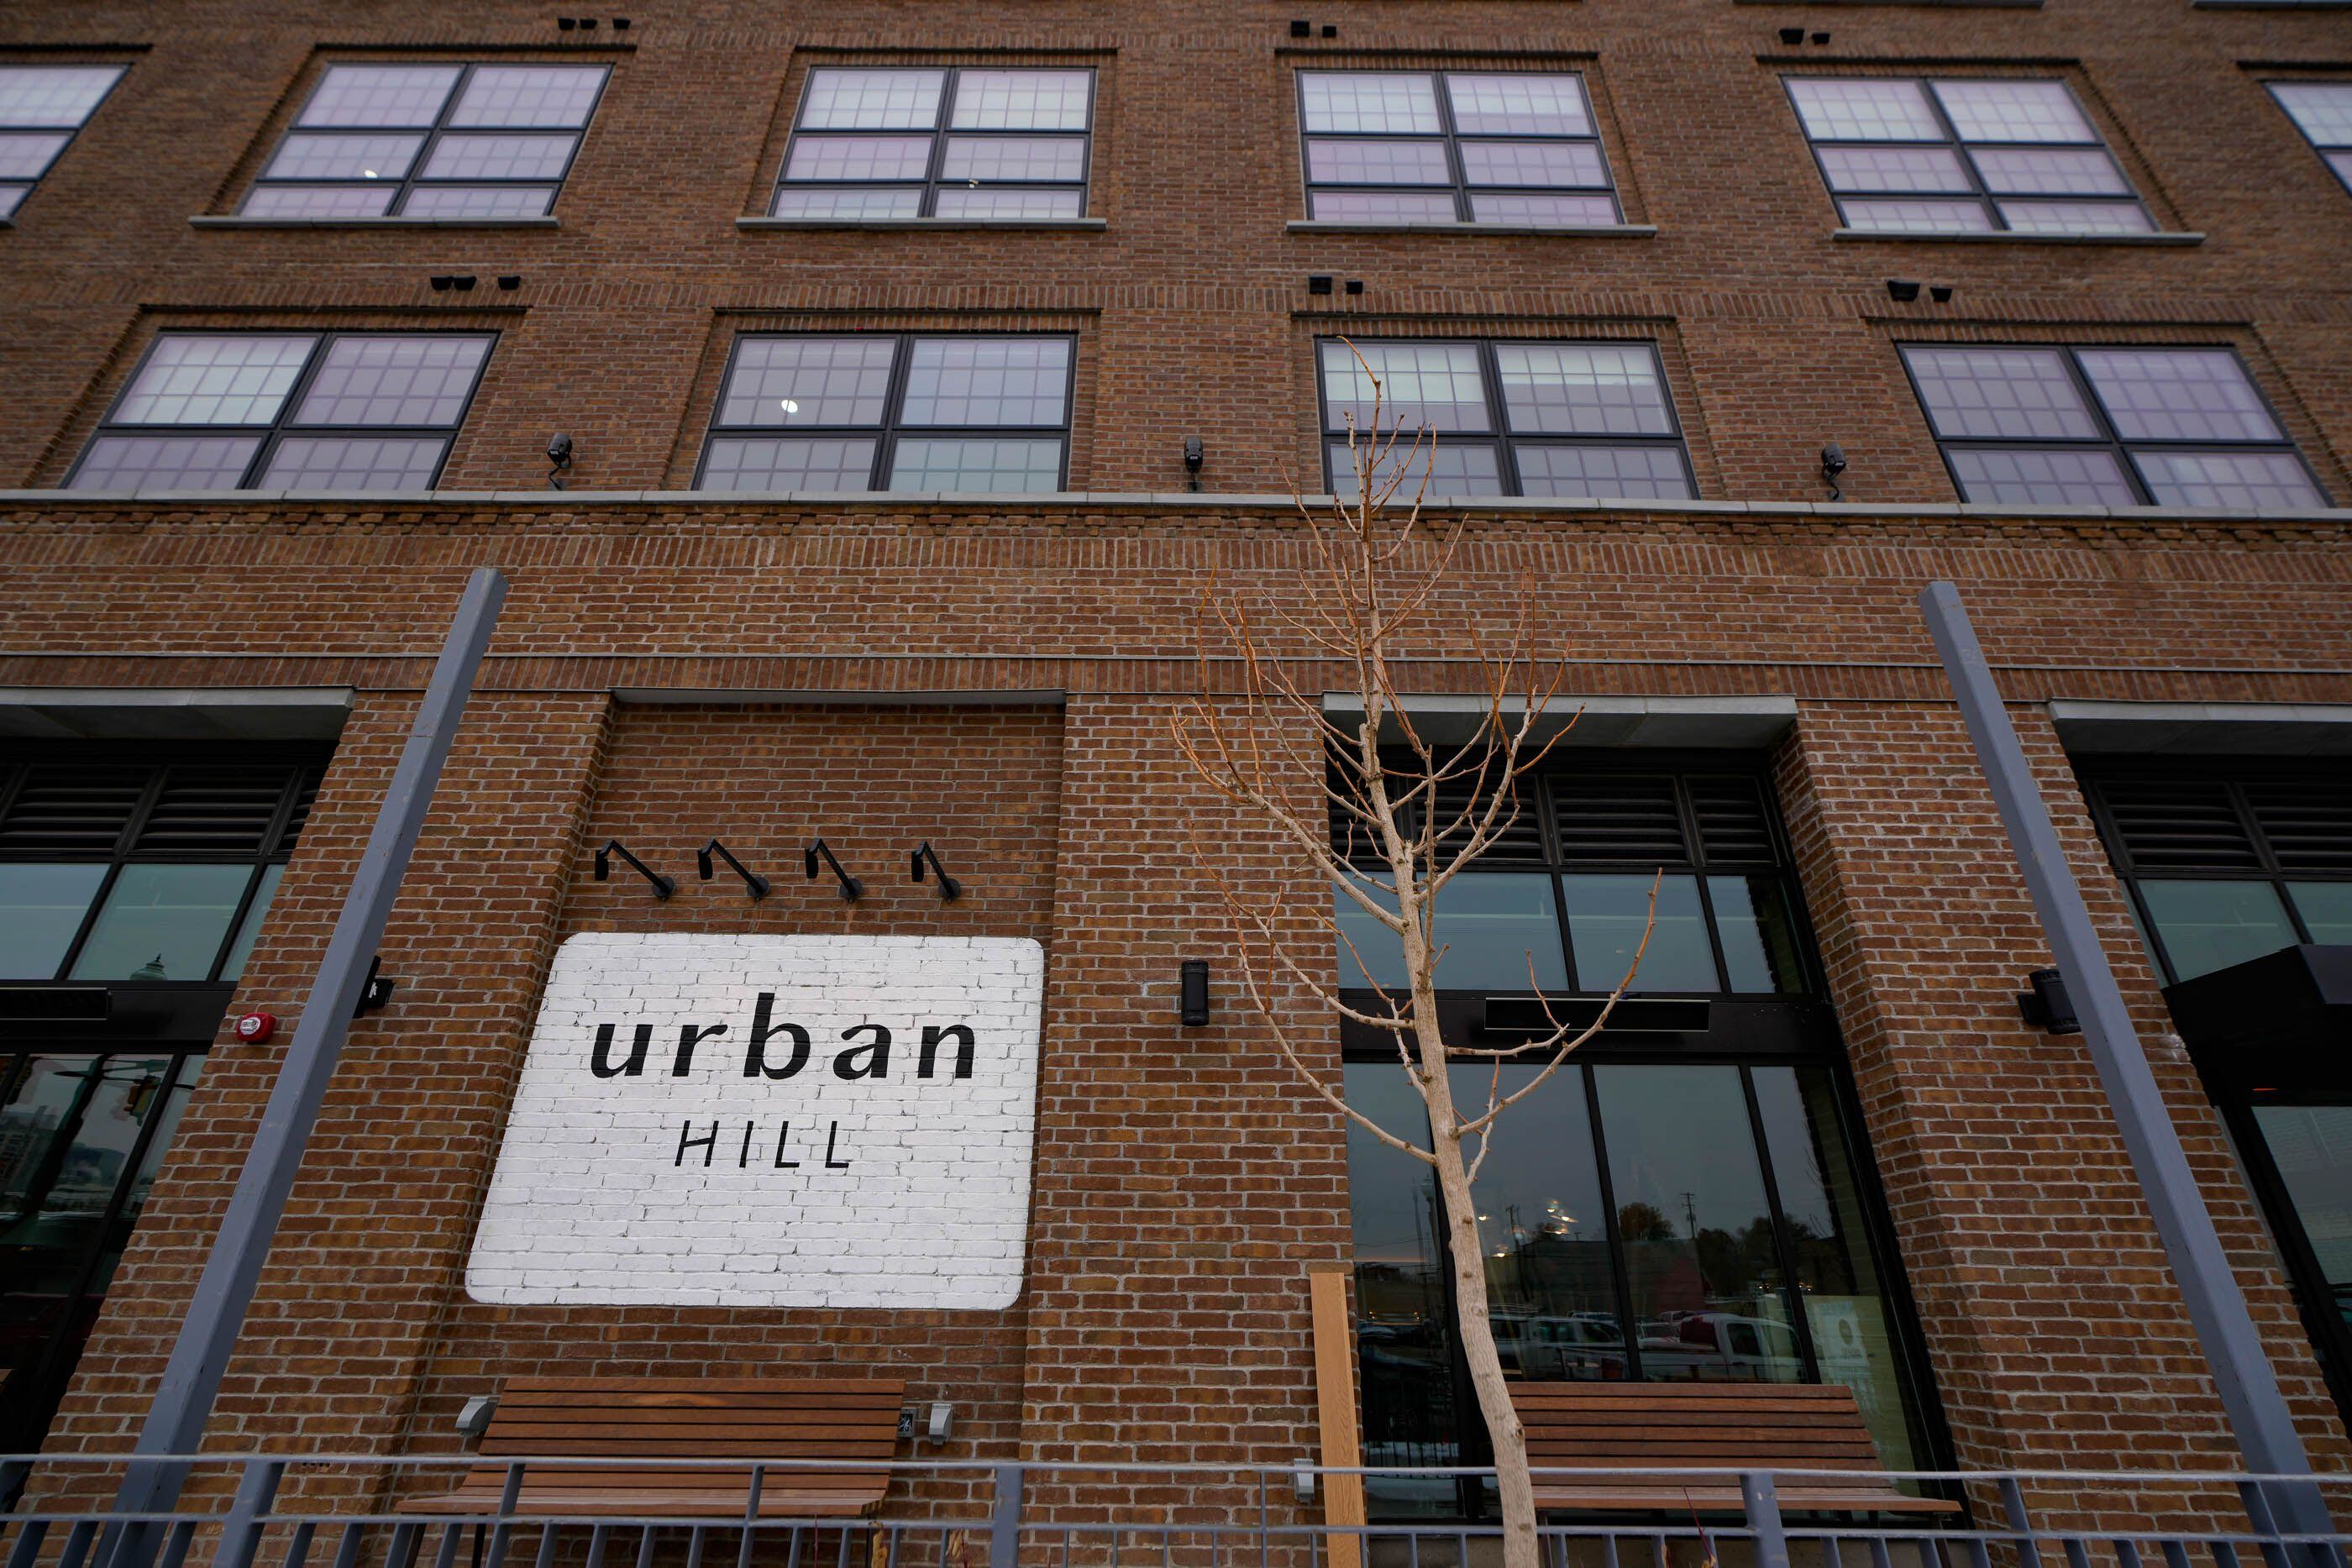 (Francisco Kjolseth | The Salt Lake Tribune) Urban Hill, Salt Lake City’s newest restaurant from Park City's Hearth & Hill restaurant group, is shown on Wednesday, Dec. 7, 2022, in the new Post District at 550 S. 300 West.